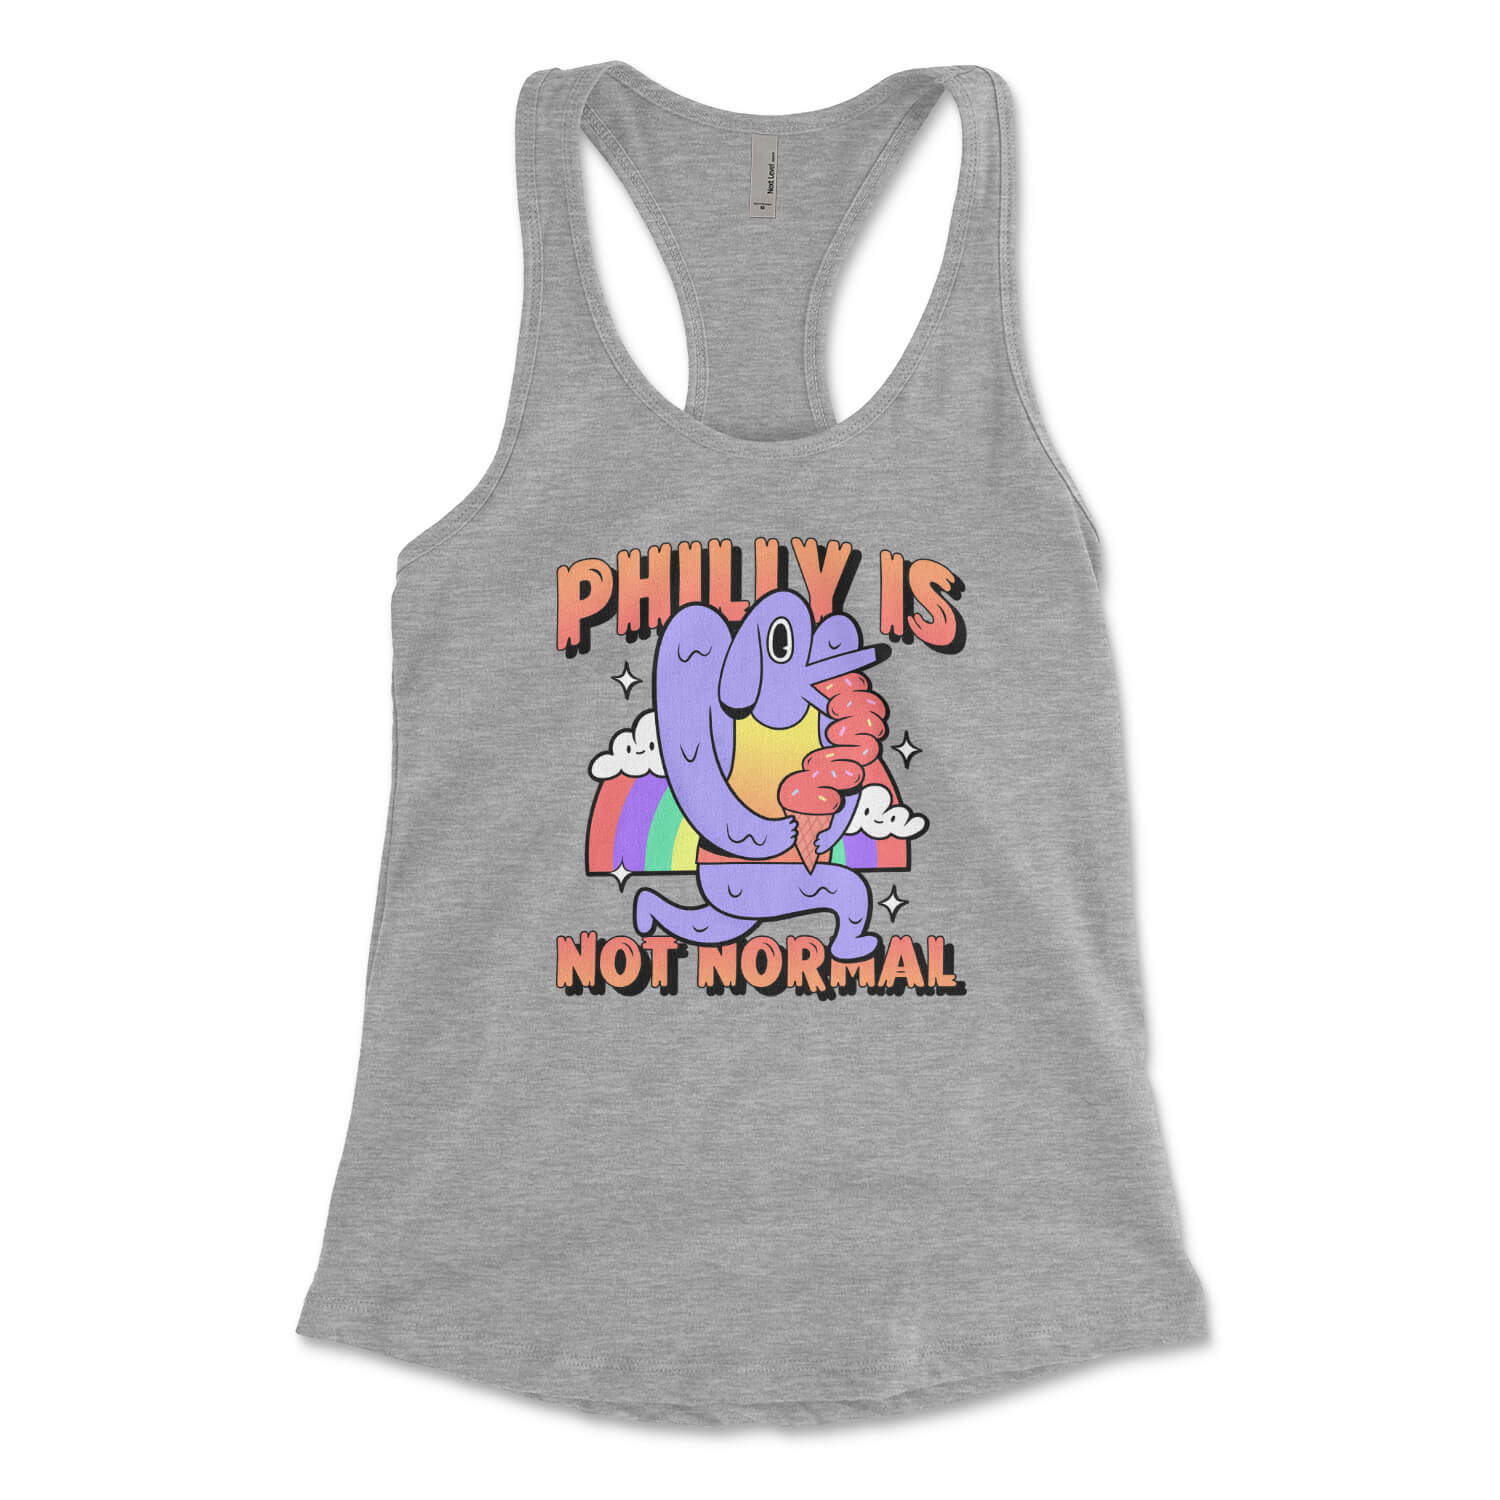 Philly is not normal dog licking ice cream in front of a rainbow design on a heather grey womens racerback tank top from Phillygoat